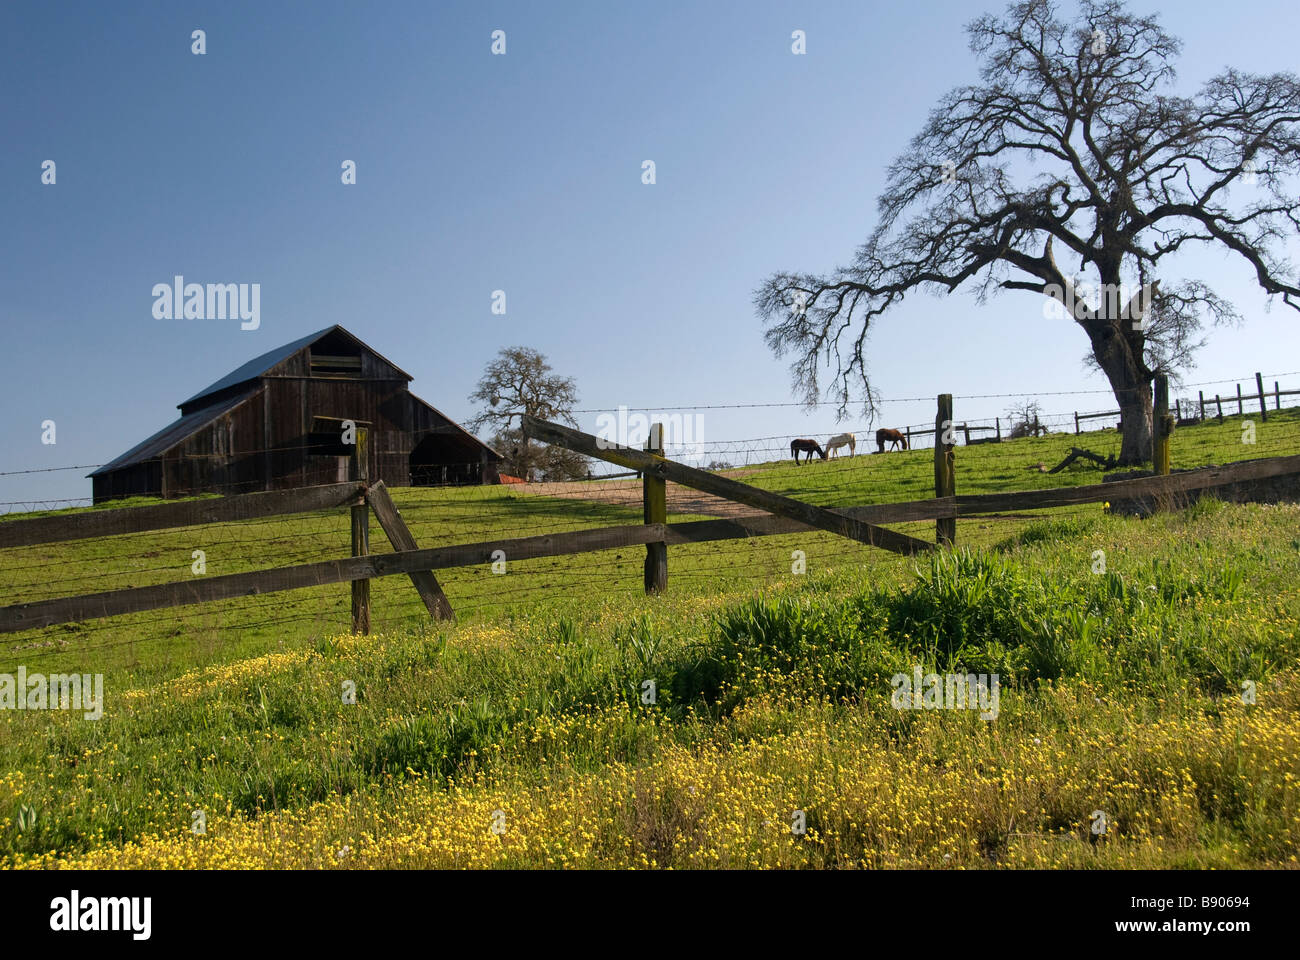 Country barn on a farm near Rock Creek Road in the Central Valley of Northern California Stock Photo